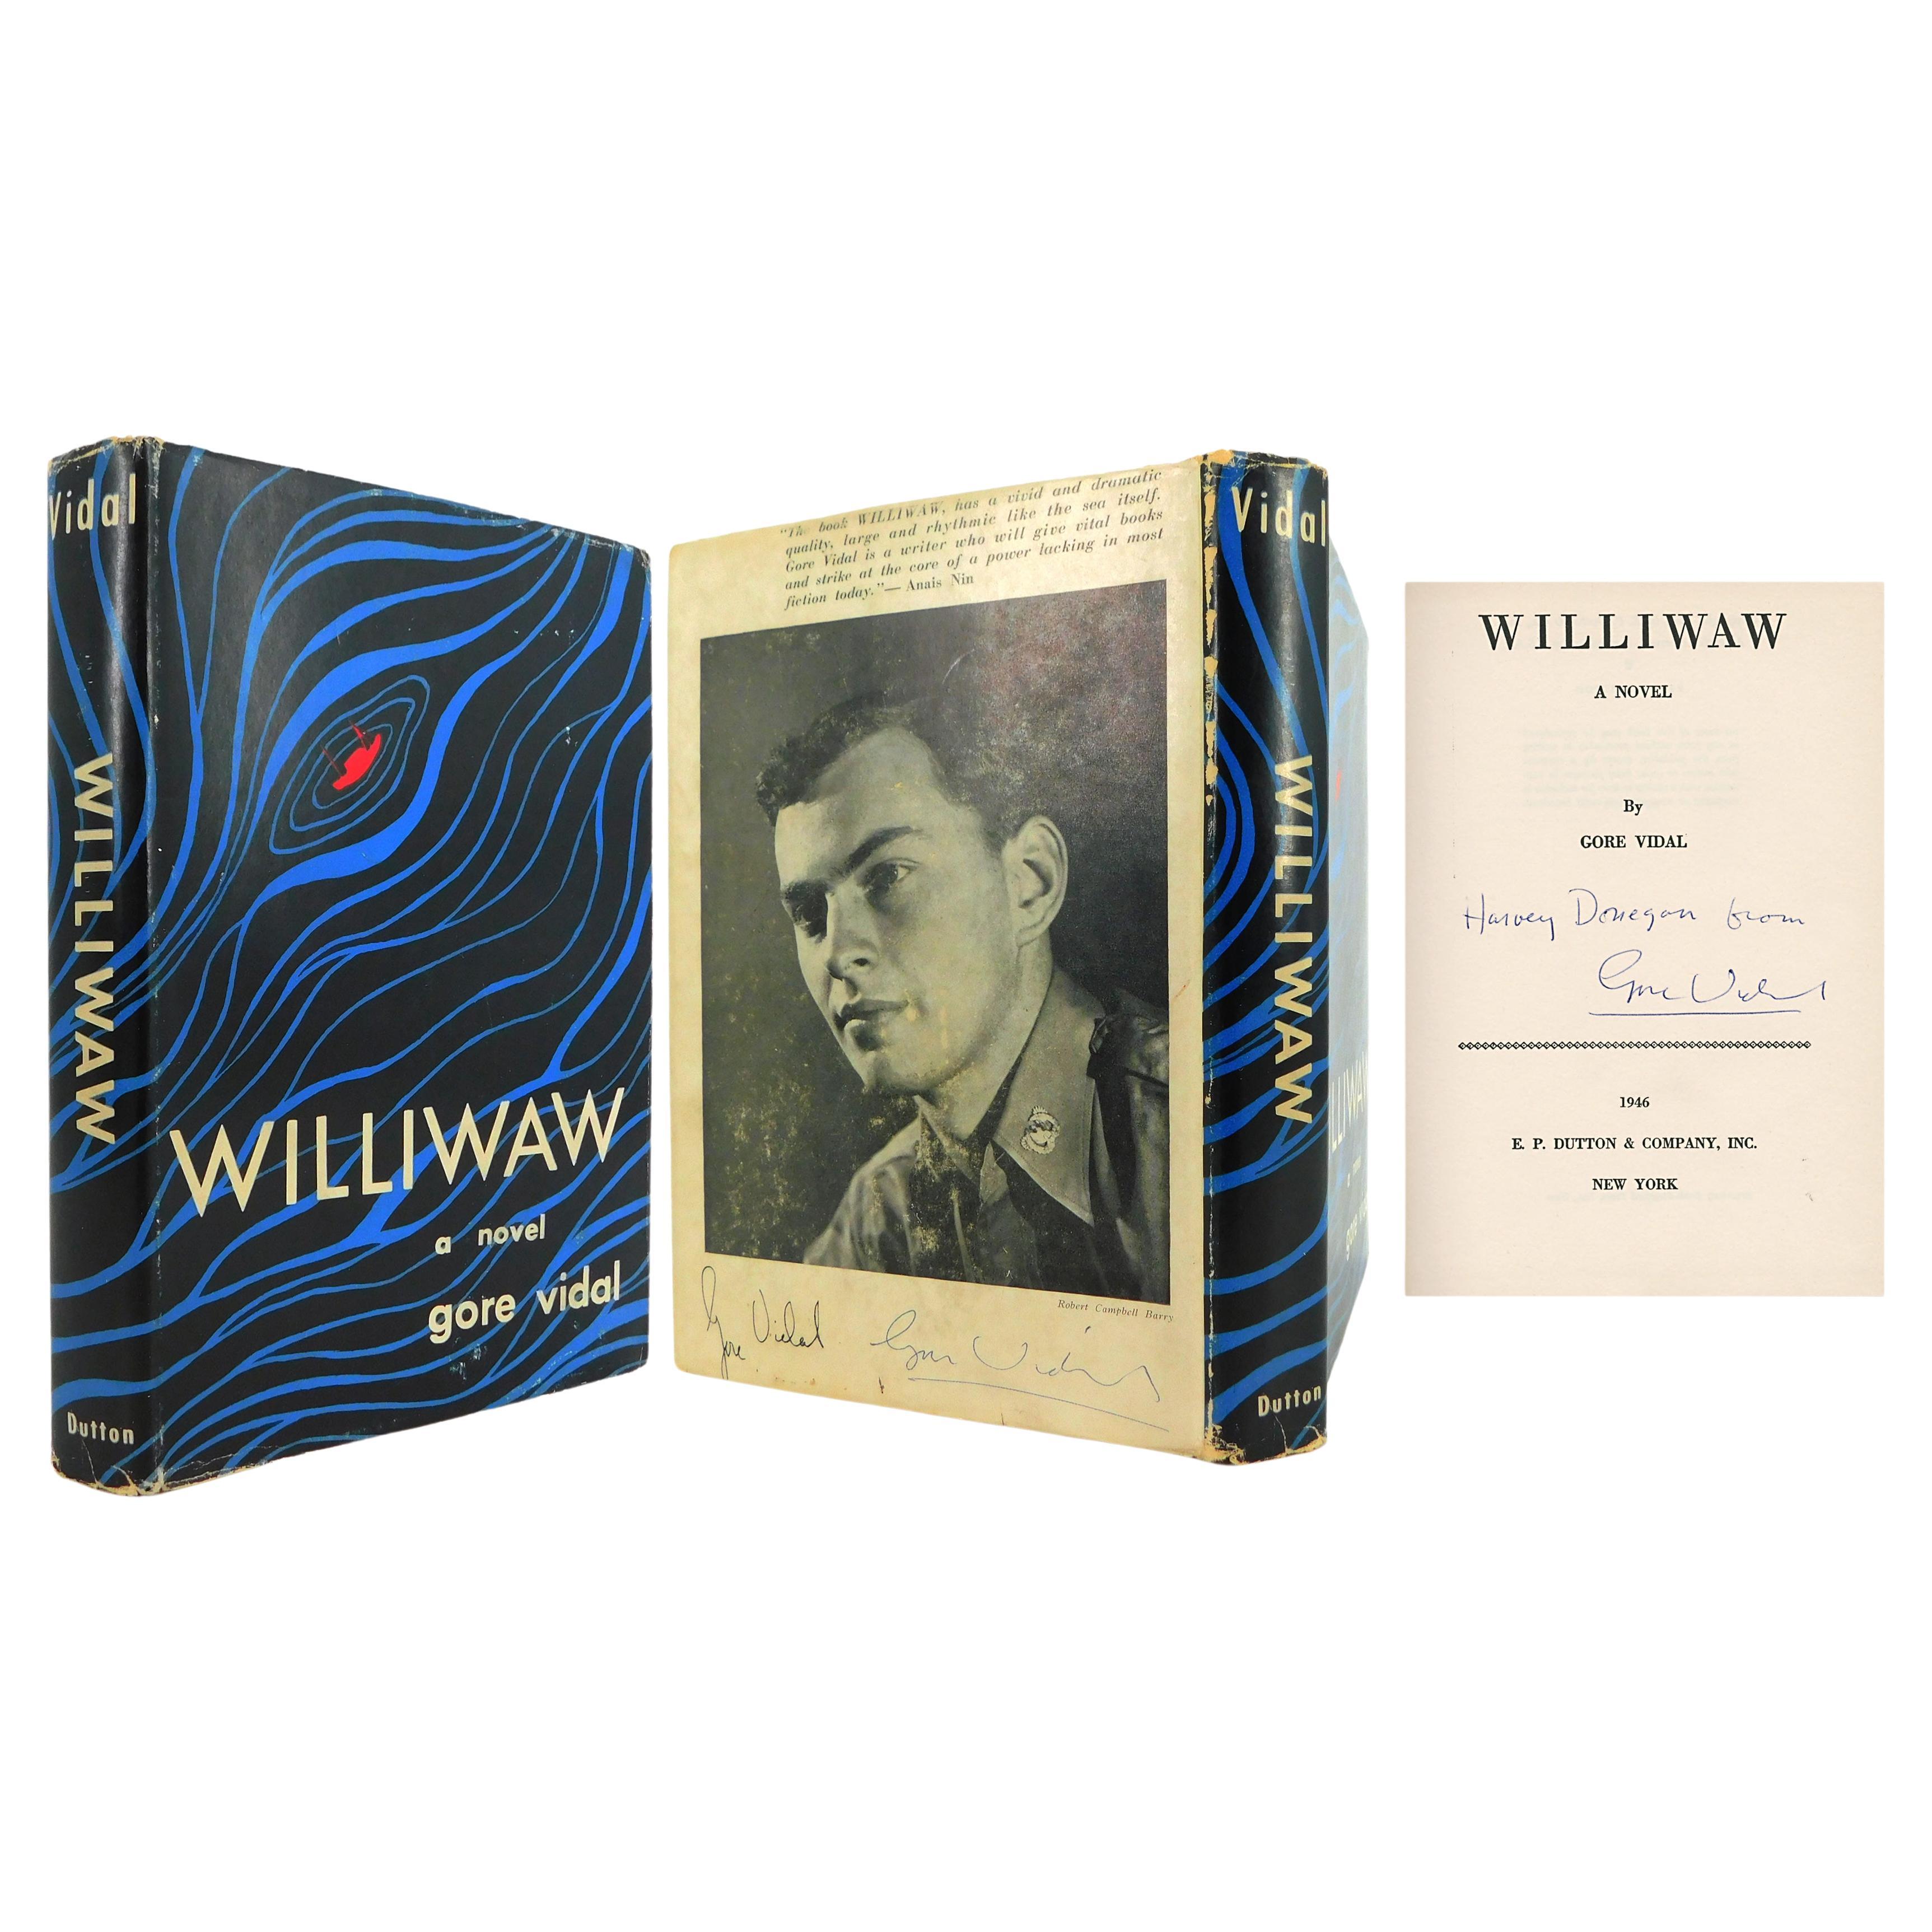 Gore Vidal's First Novel "WILLIWAW", Signed First Edition For Sale